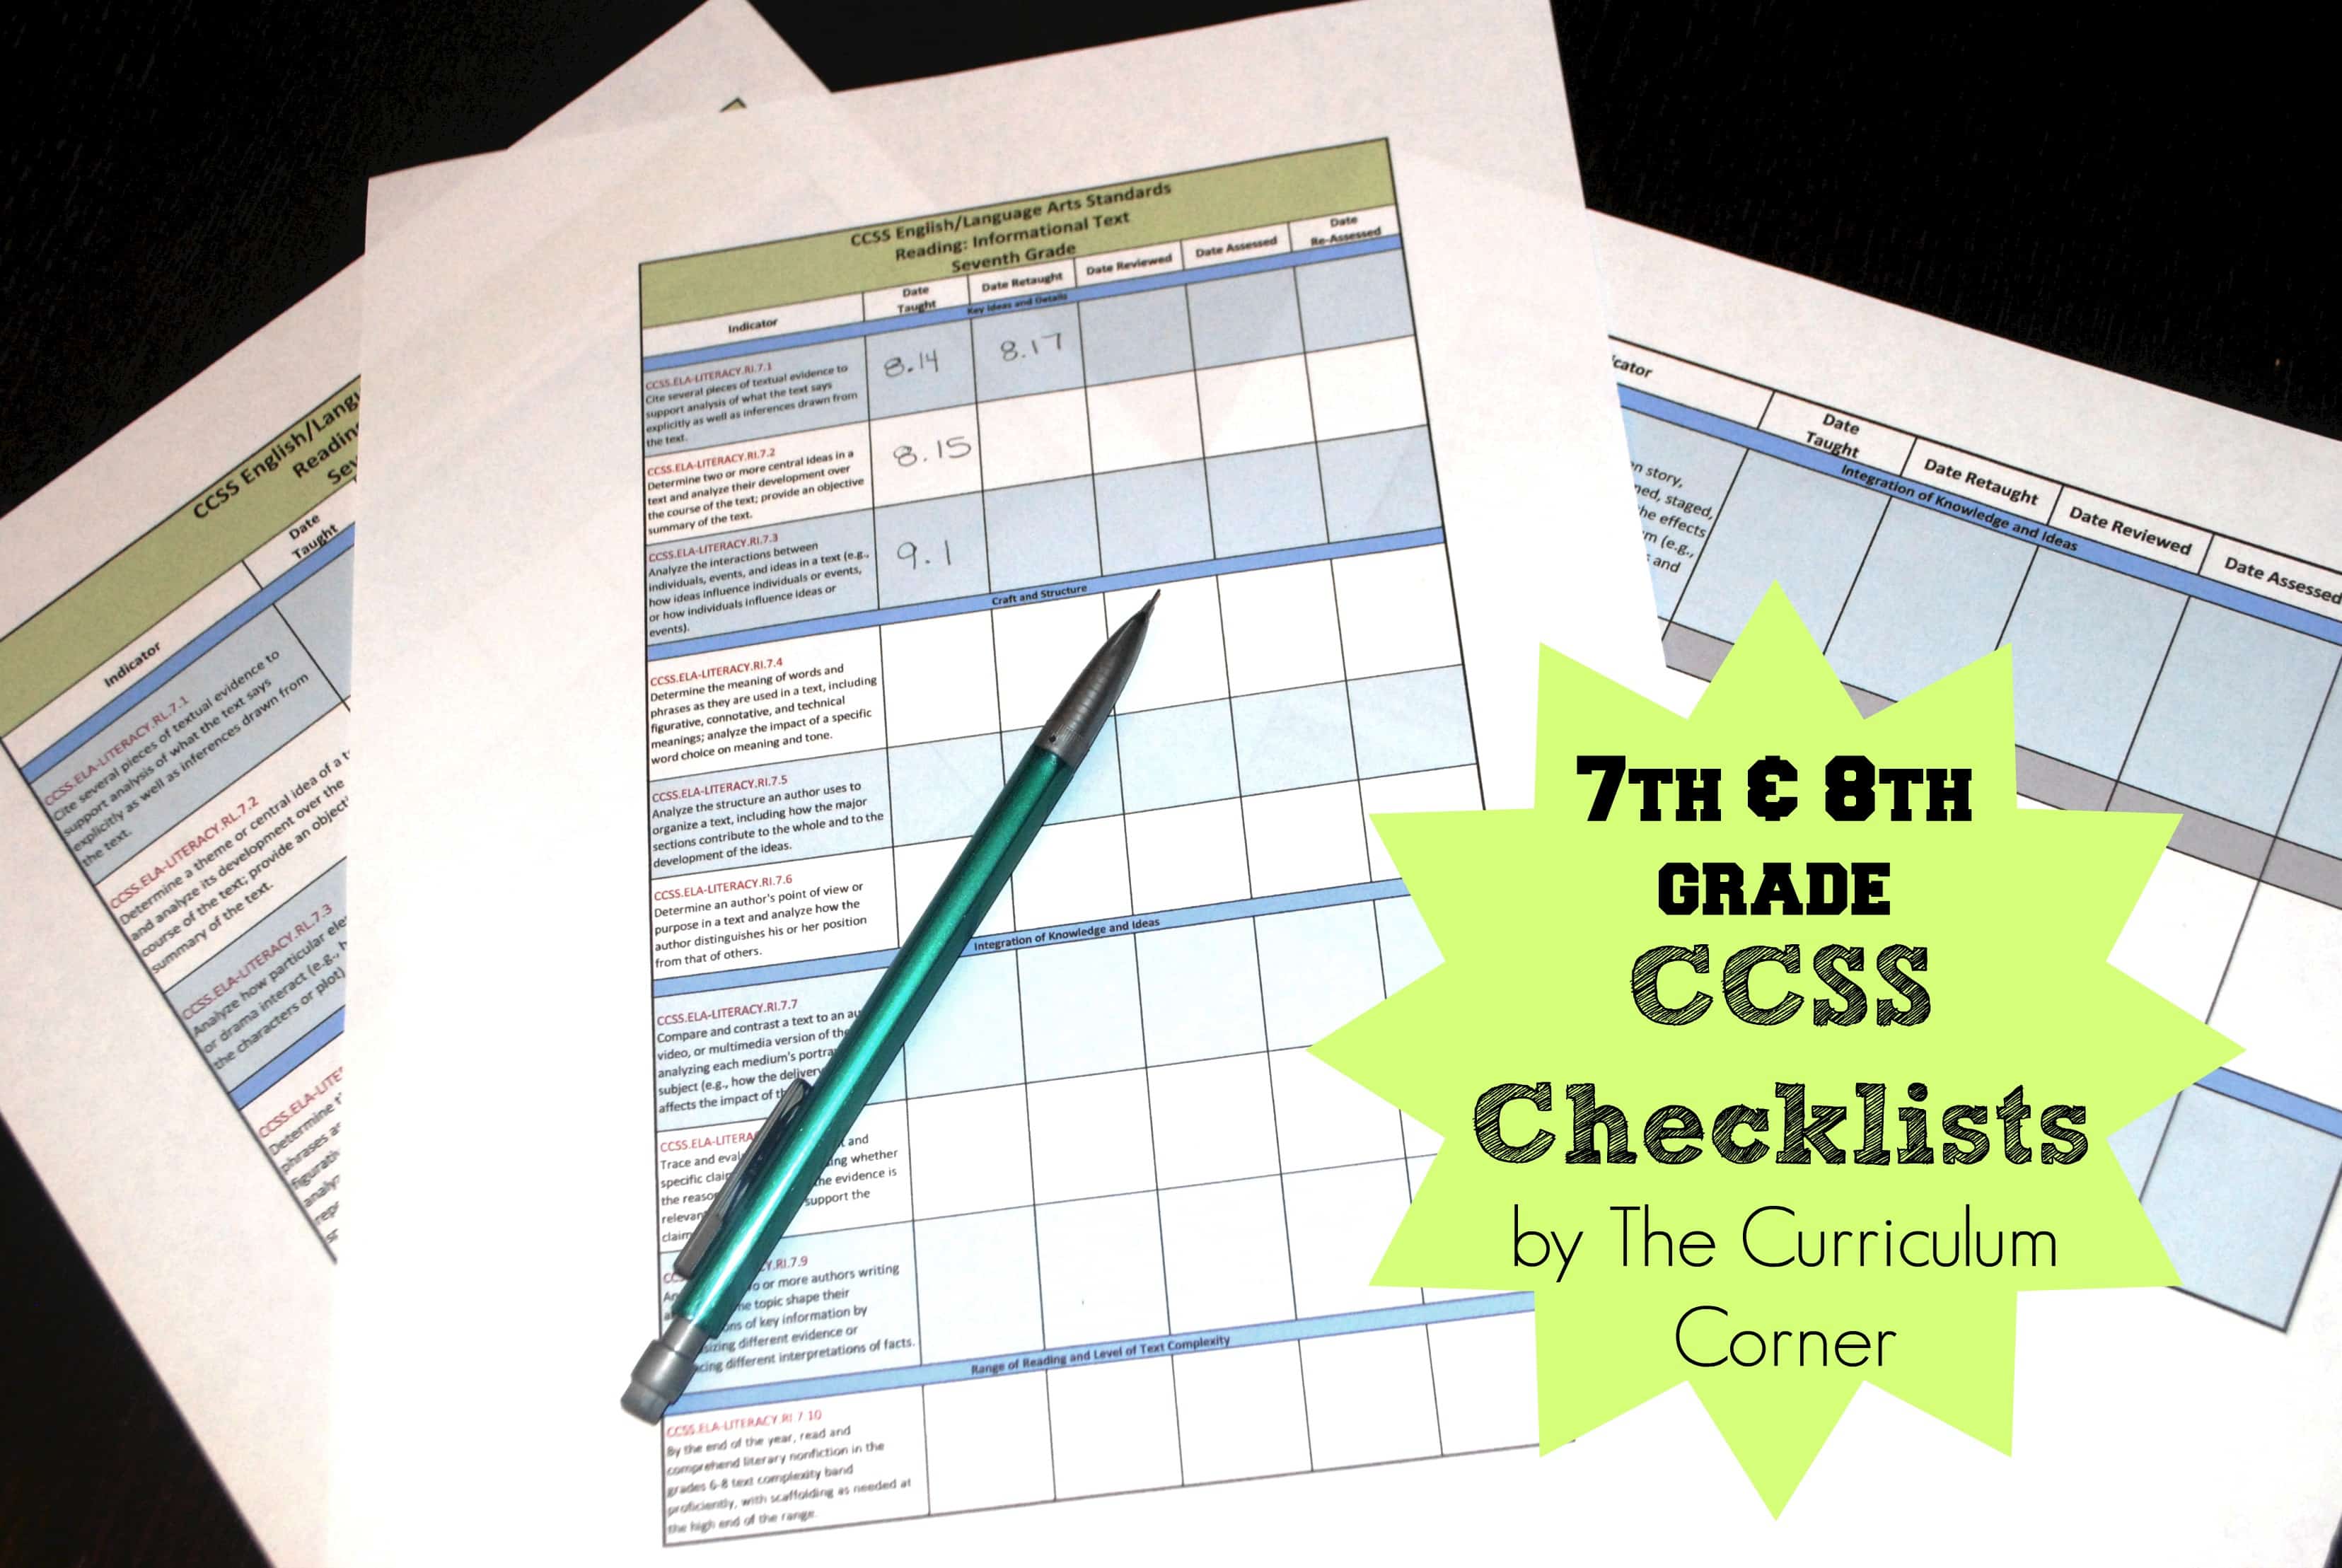 updated-7th-and-8th-grade-ccss-checklists-the-curriculum-corner-4-5-6